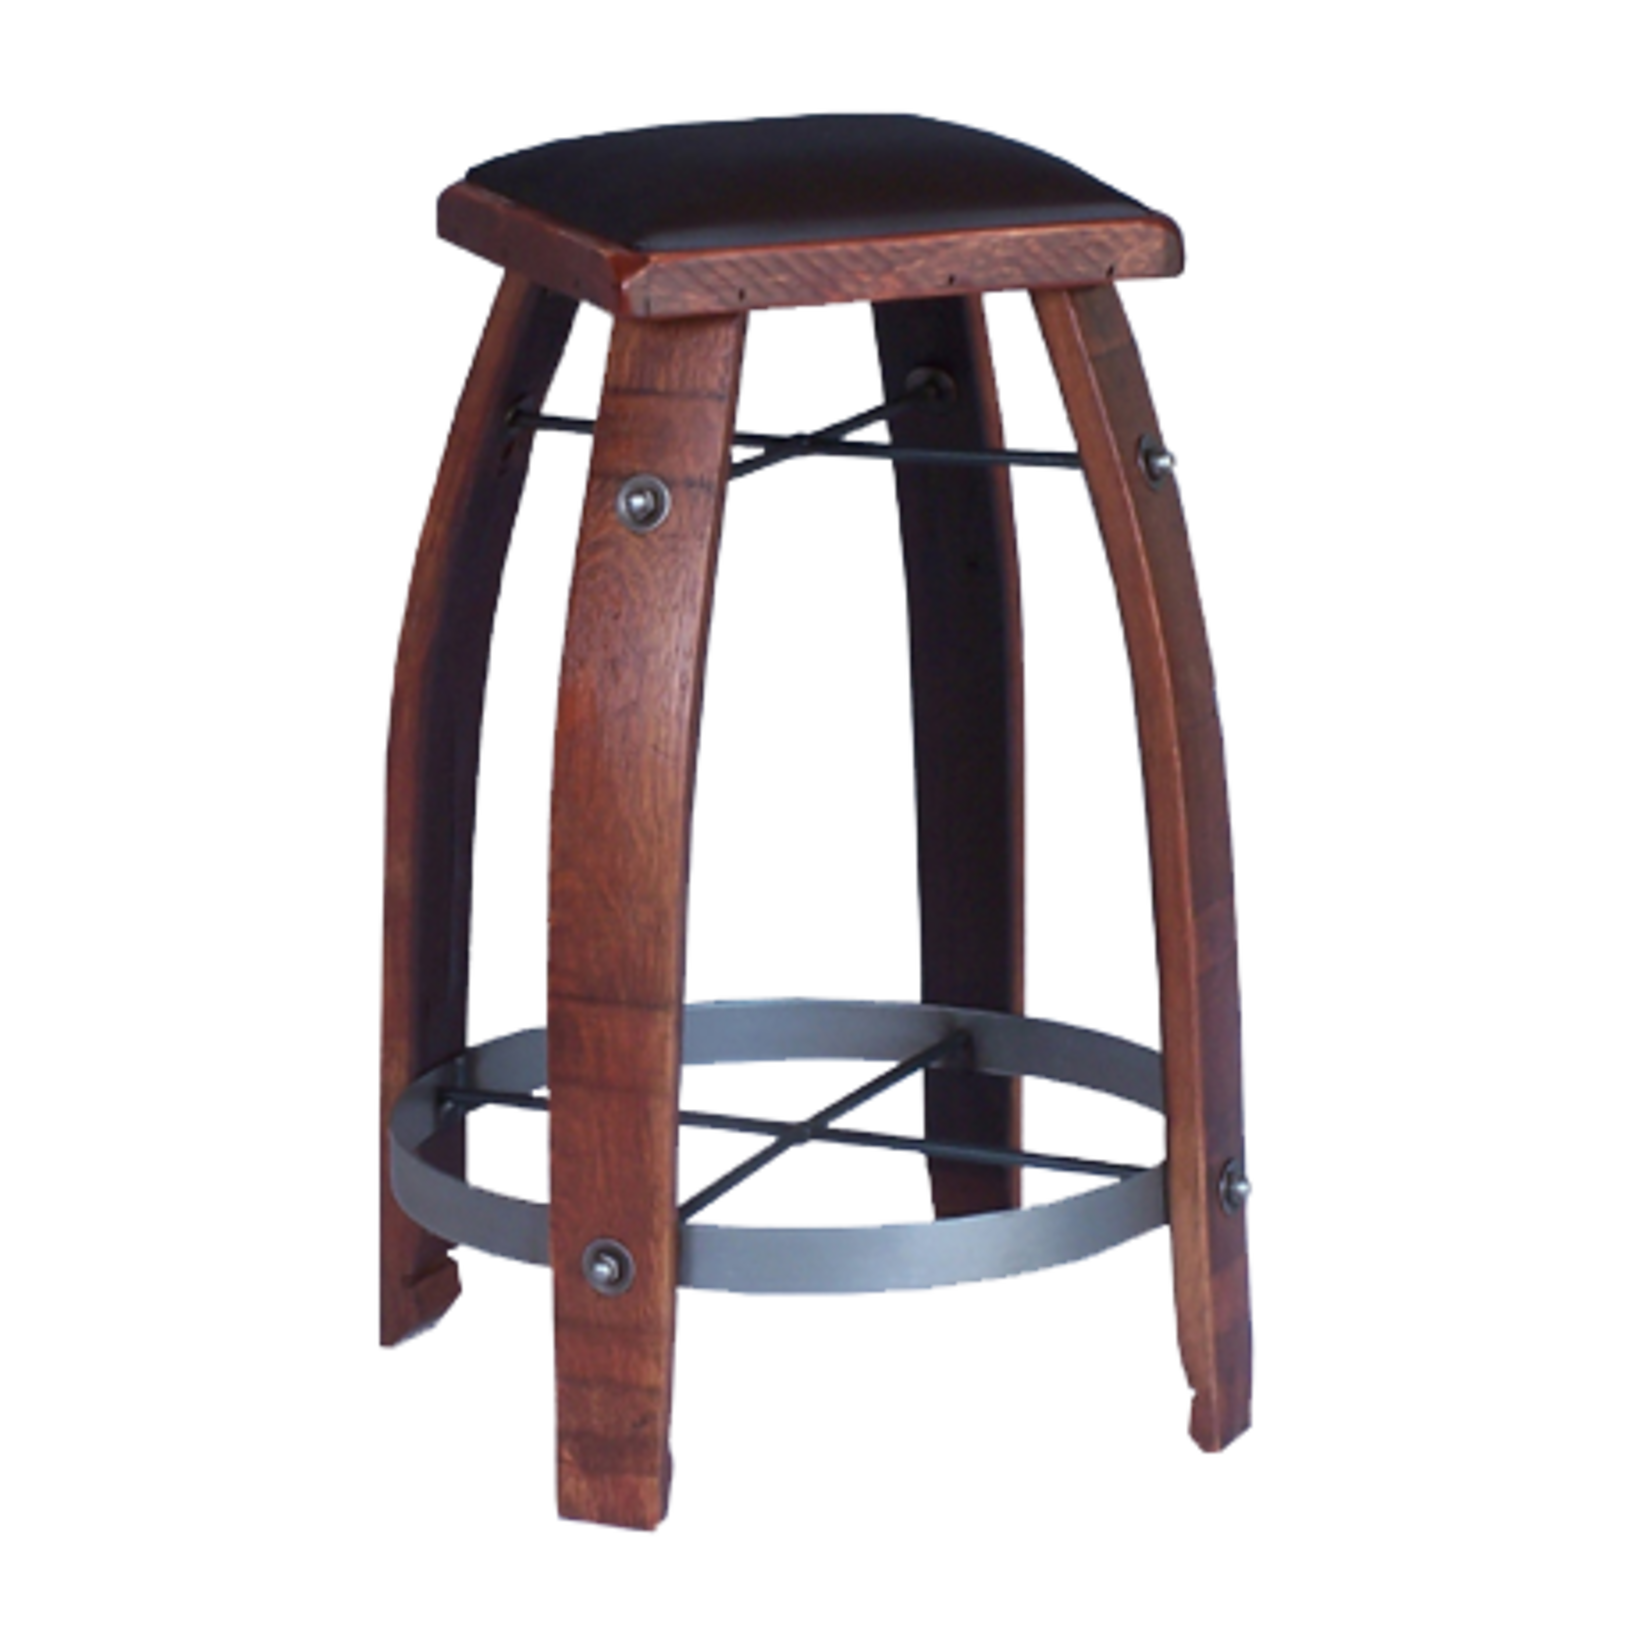 Southern Splinter Stave Stool with Leather Seat